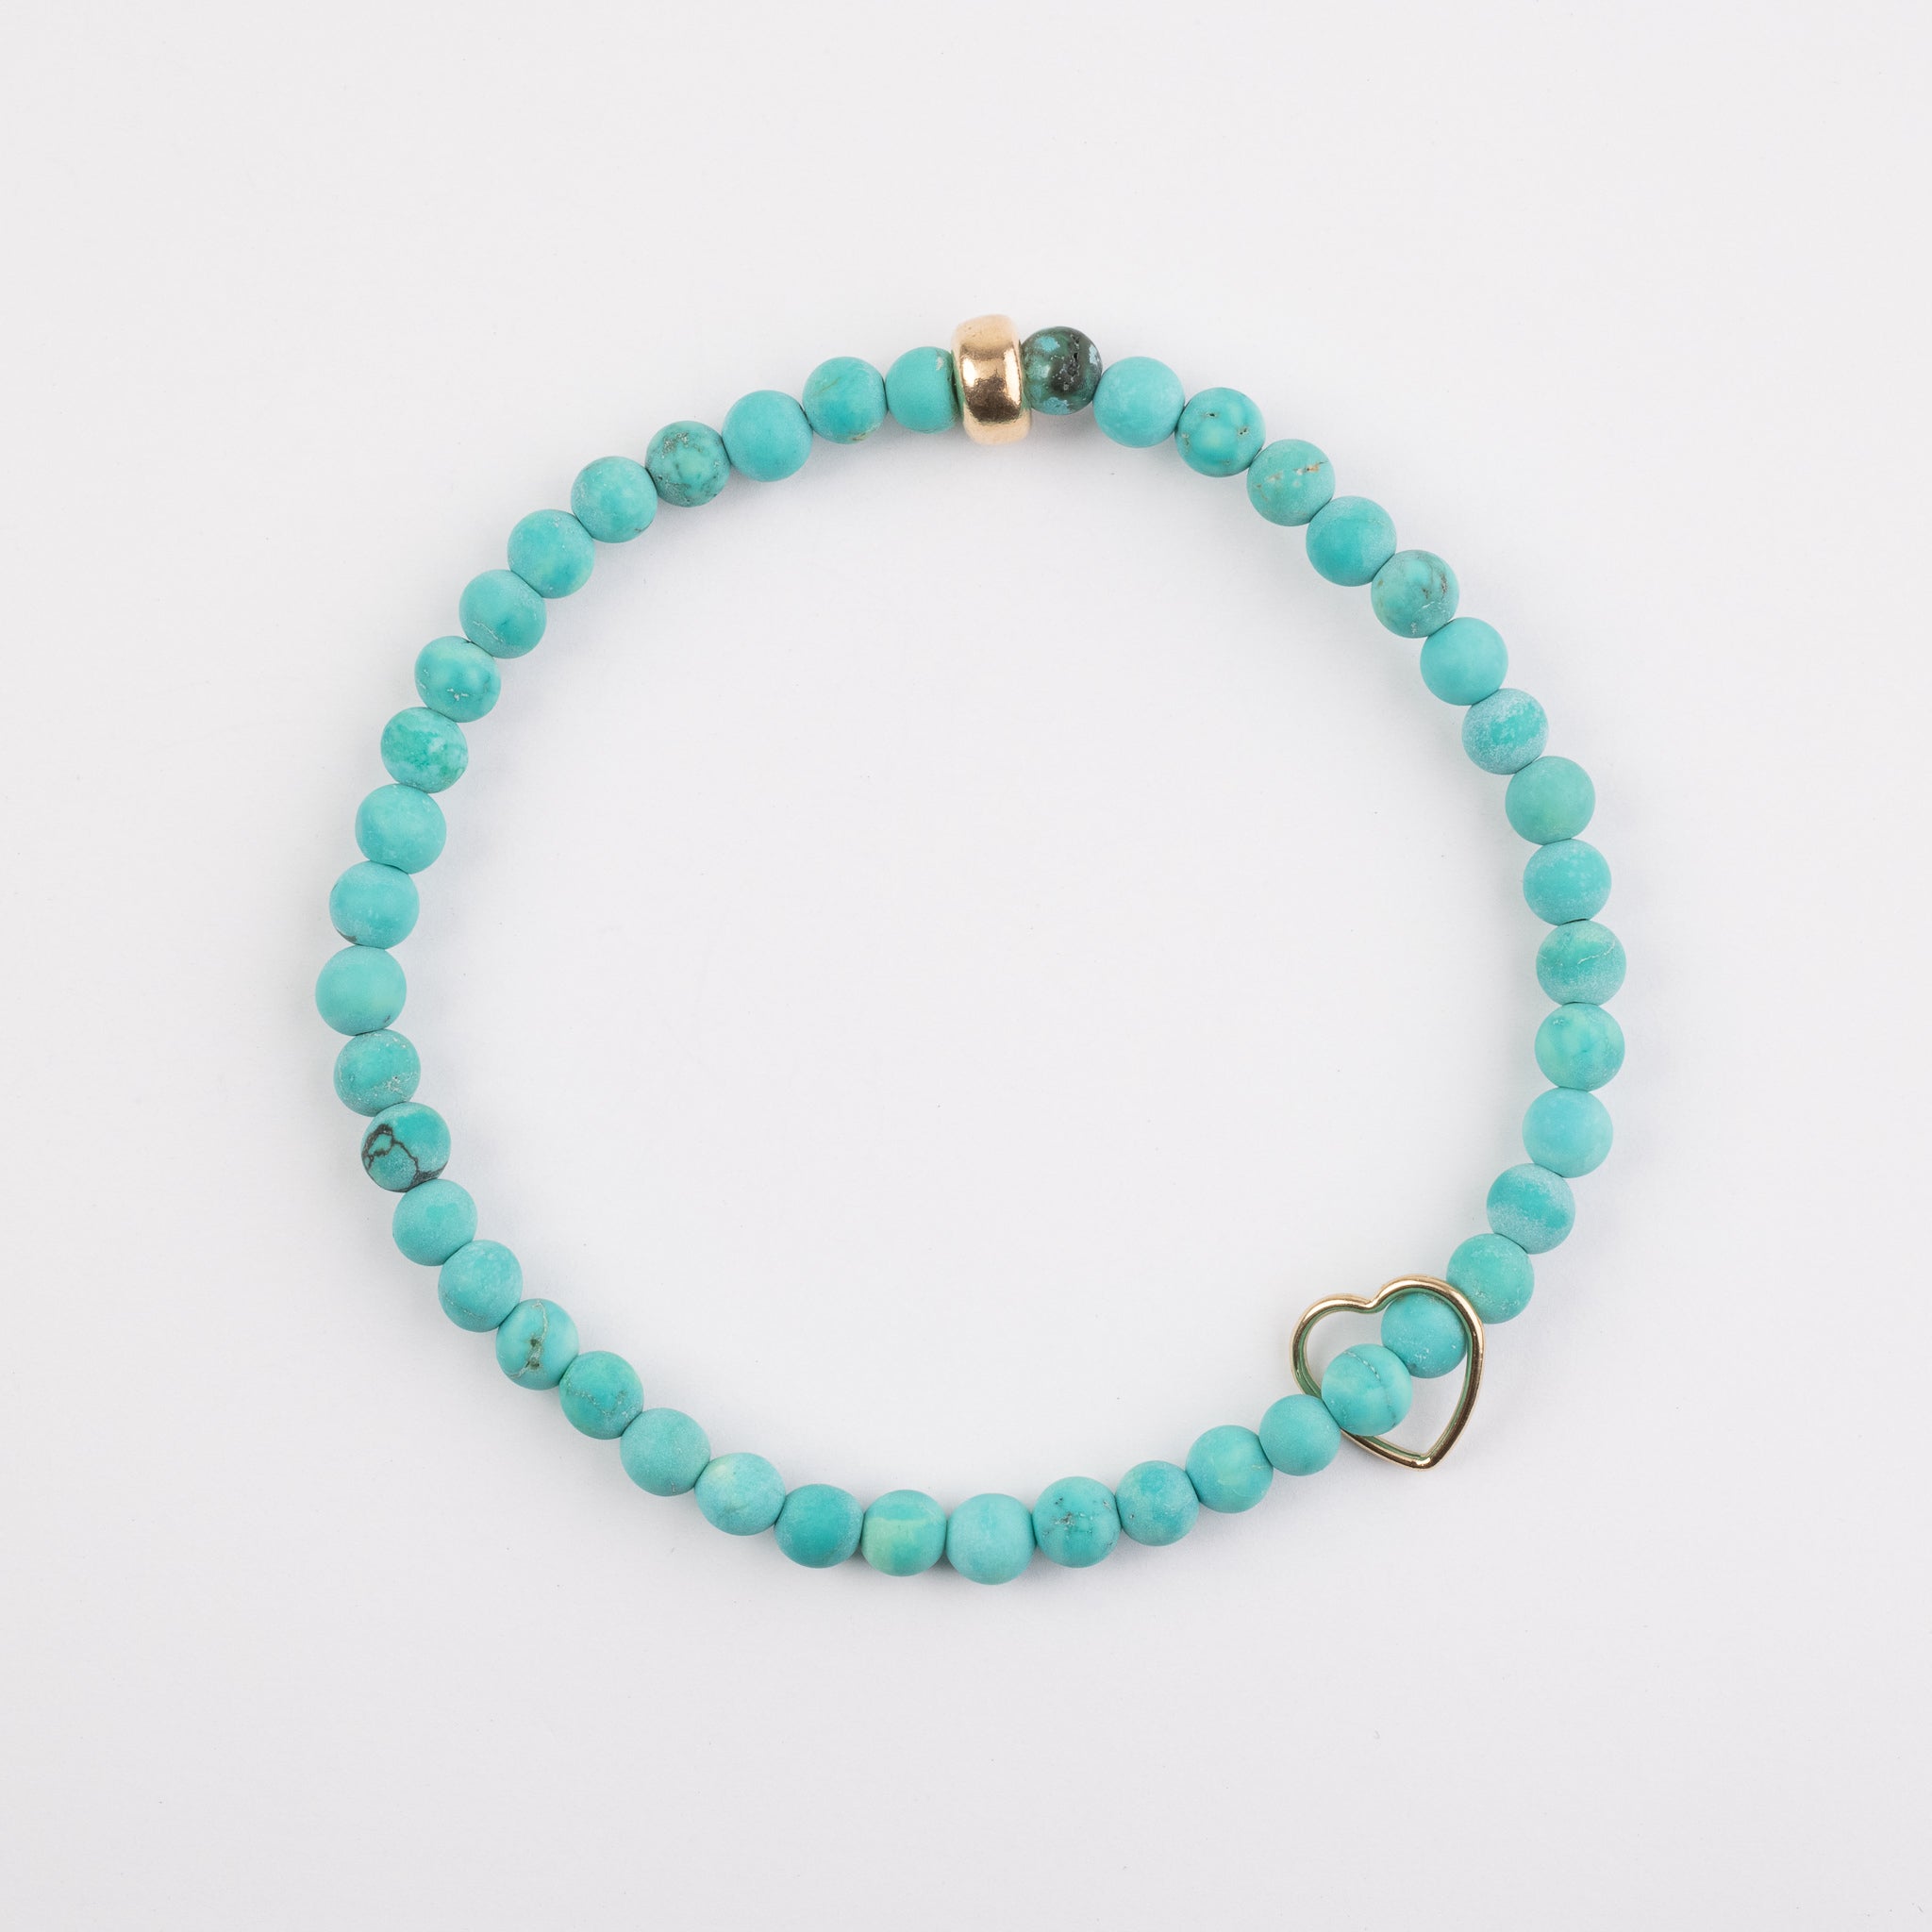 4mm Matte Tibetan Turquoise Floating Gold Heart Bracelet - Sorry - Sold Out